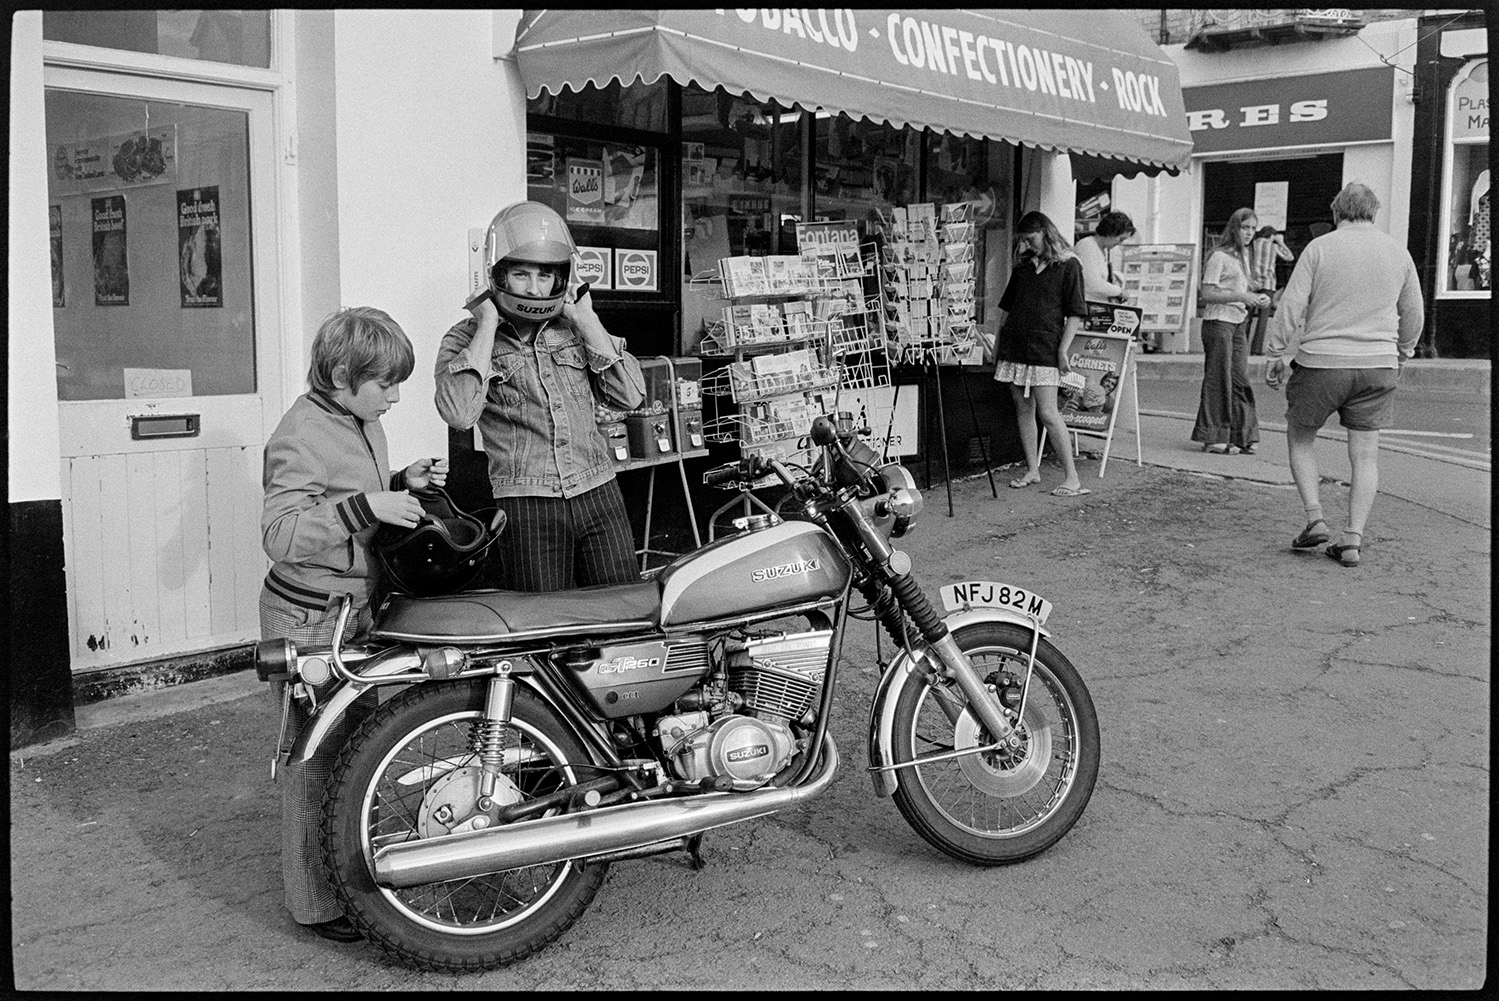 Motorbike and rider at seaside. 
[A motocyclist and child putting on helmets next to their motorbike which is parked outside a giftshop at Westward Ho! A woman is looking at postcards displayed outside the giftshop.]